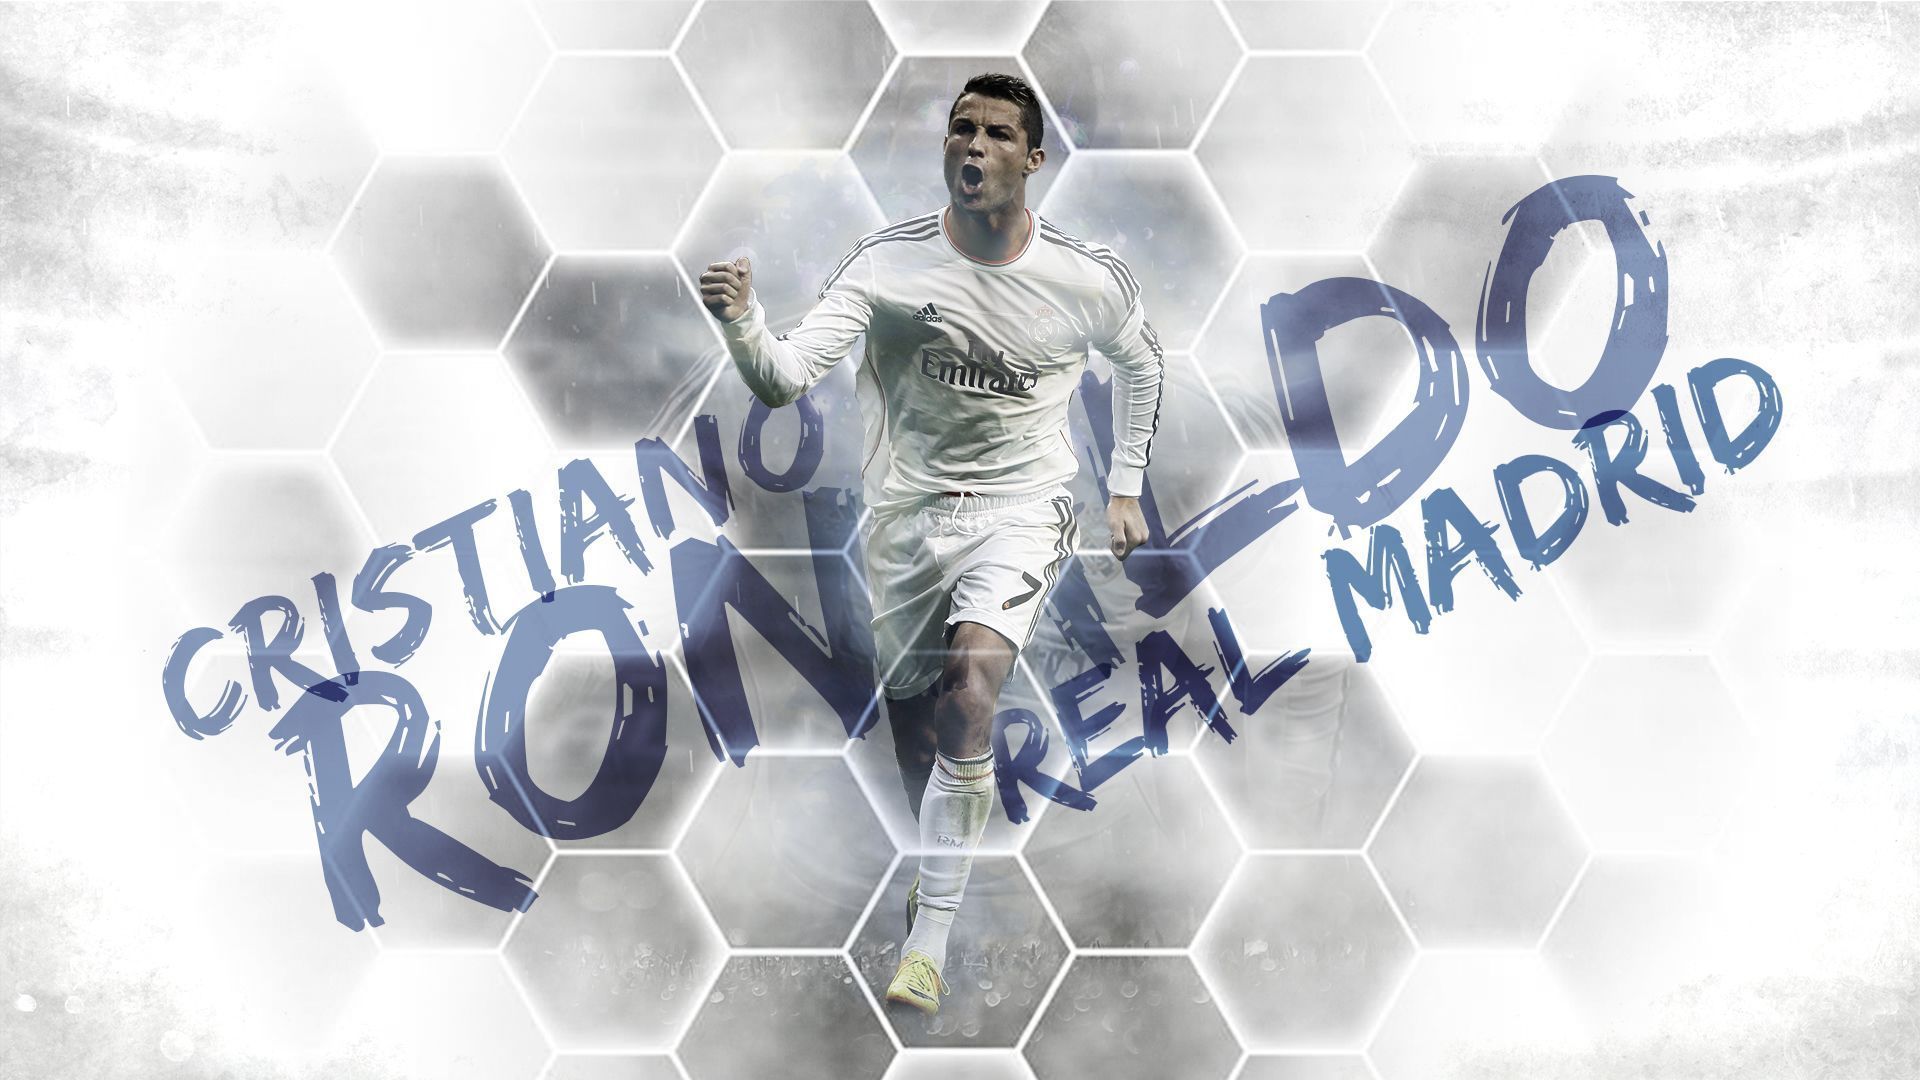 Cristiano ronaldo real madrid wallpaper | Wallpapers, Backgrounds ...